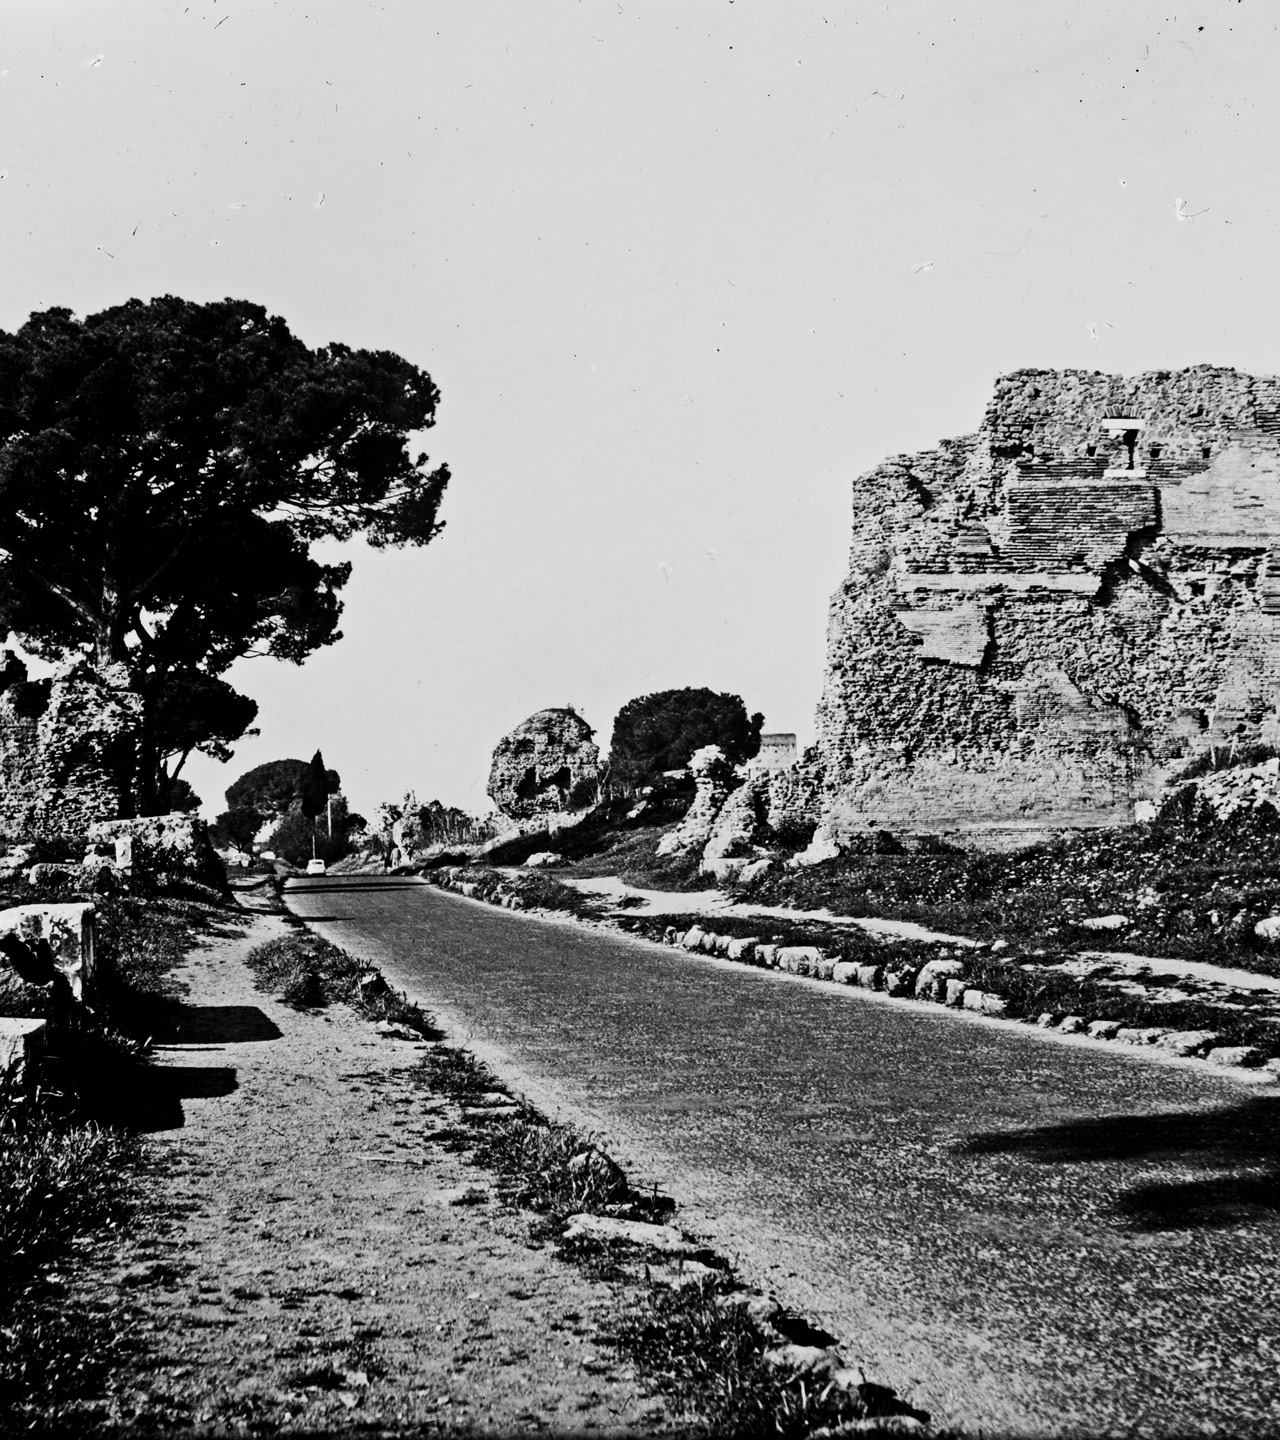 Rome. Surfaced Appian Way in Rome, modern highway